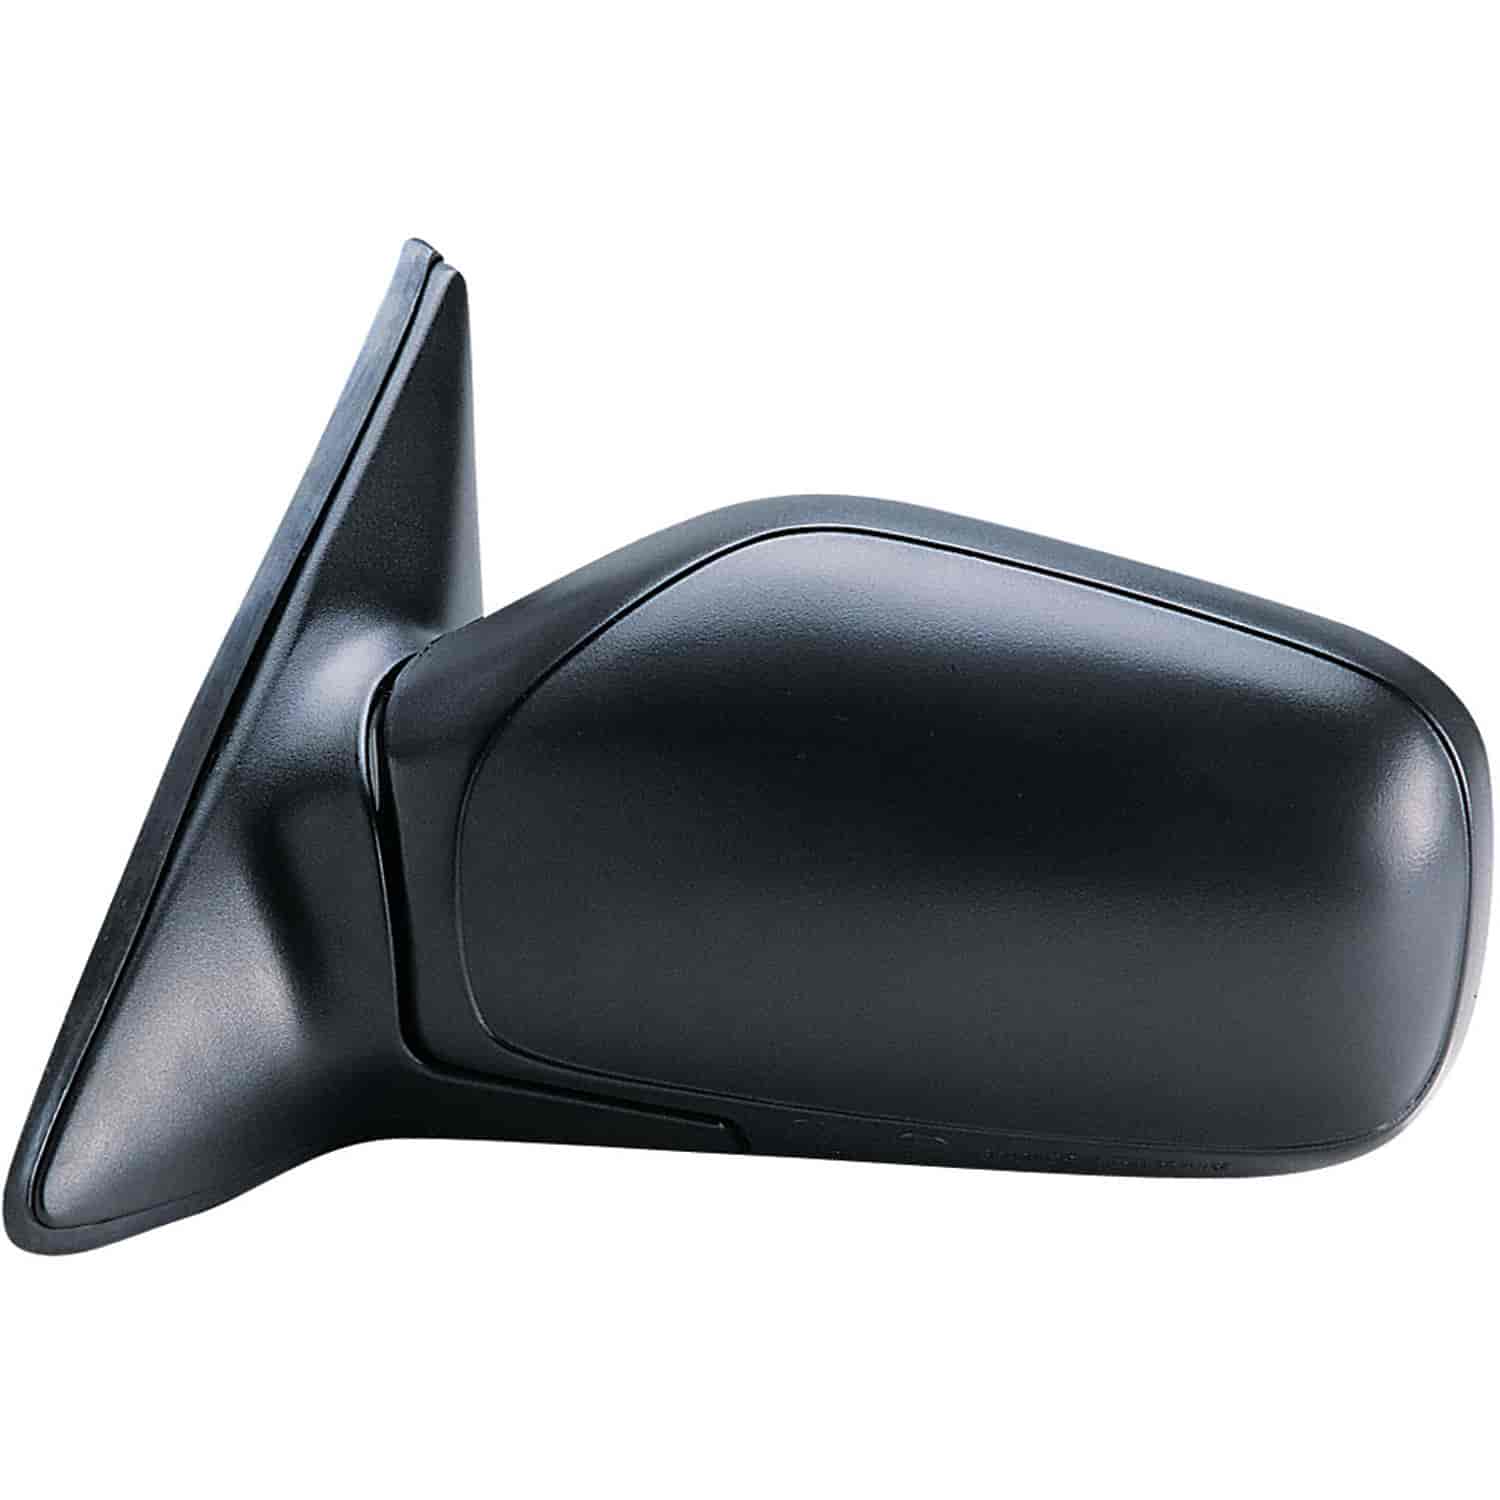 OEM Style Replacement mirror for 91-94 Nissan Sentra Sedan Japan built driver side mirror tested to